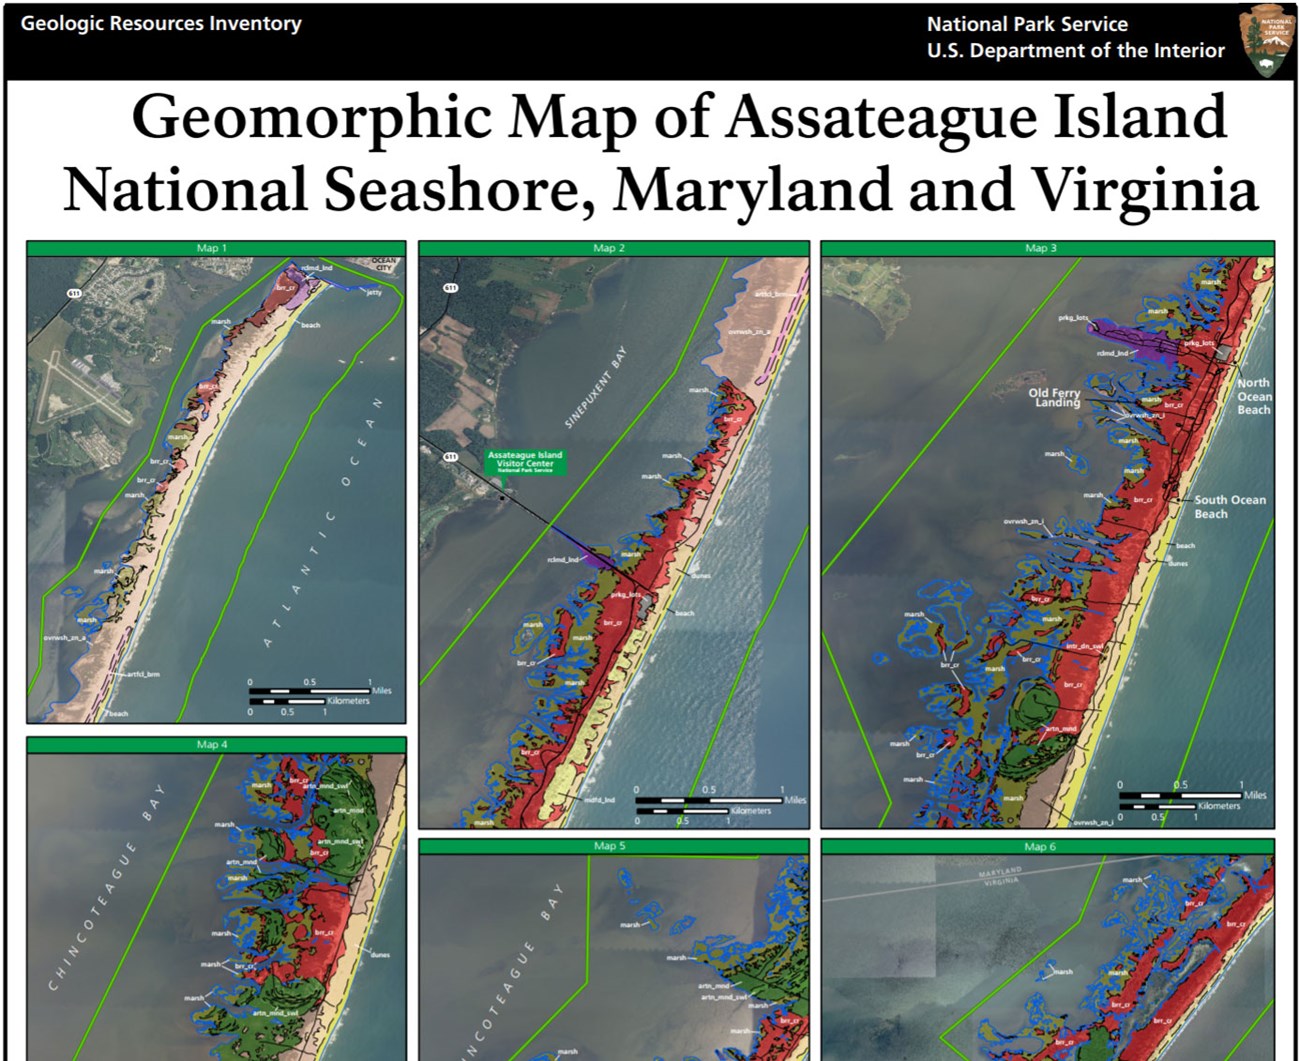 link to assateague island geomorphic map